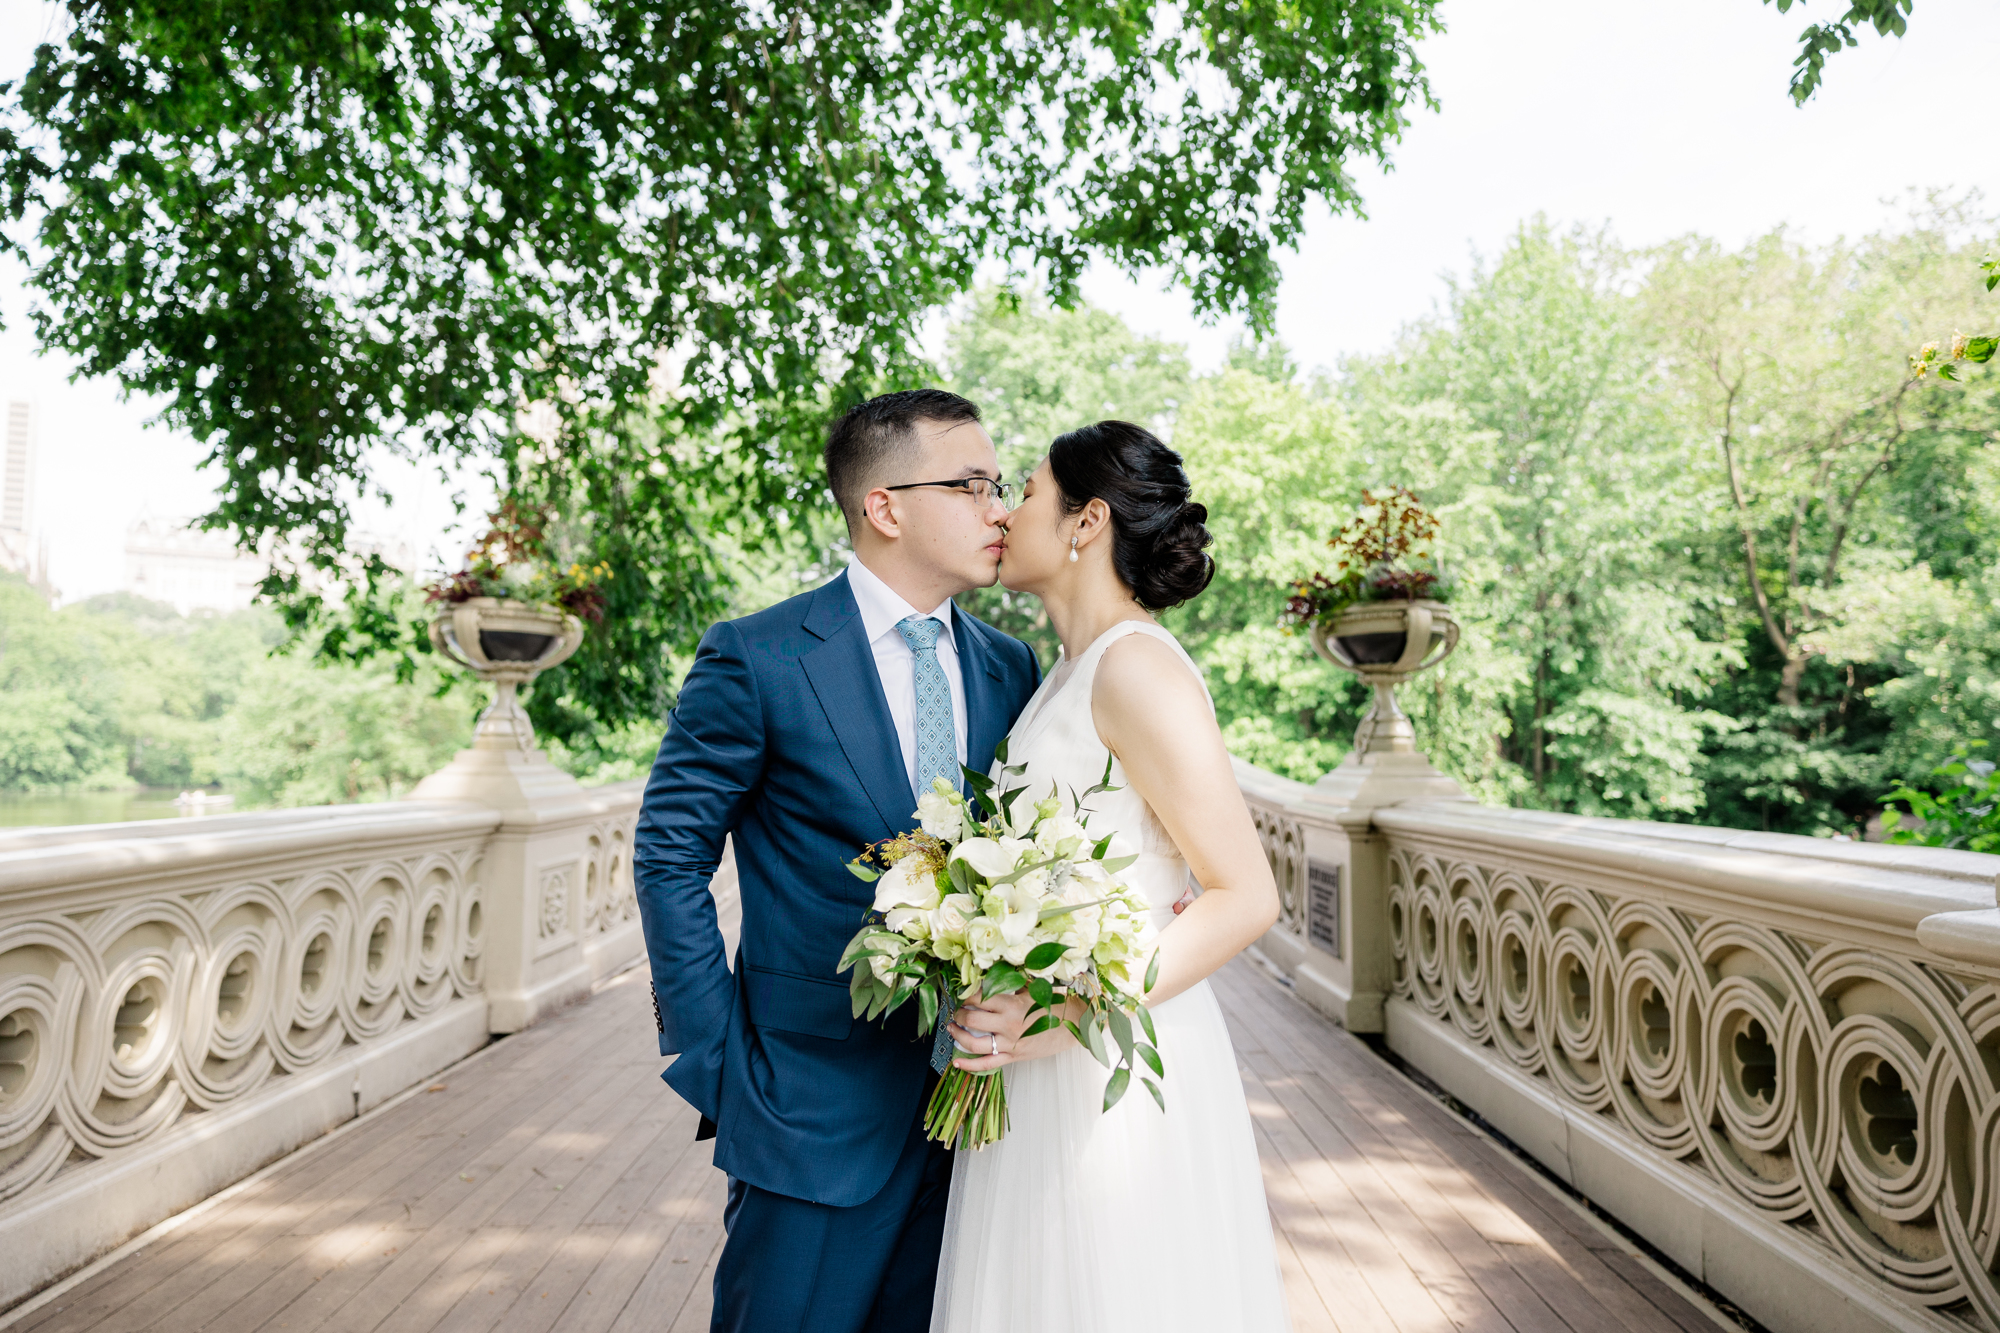 Beautiful Elopement Photos in DUMBO and Central Park New York